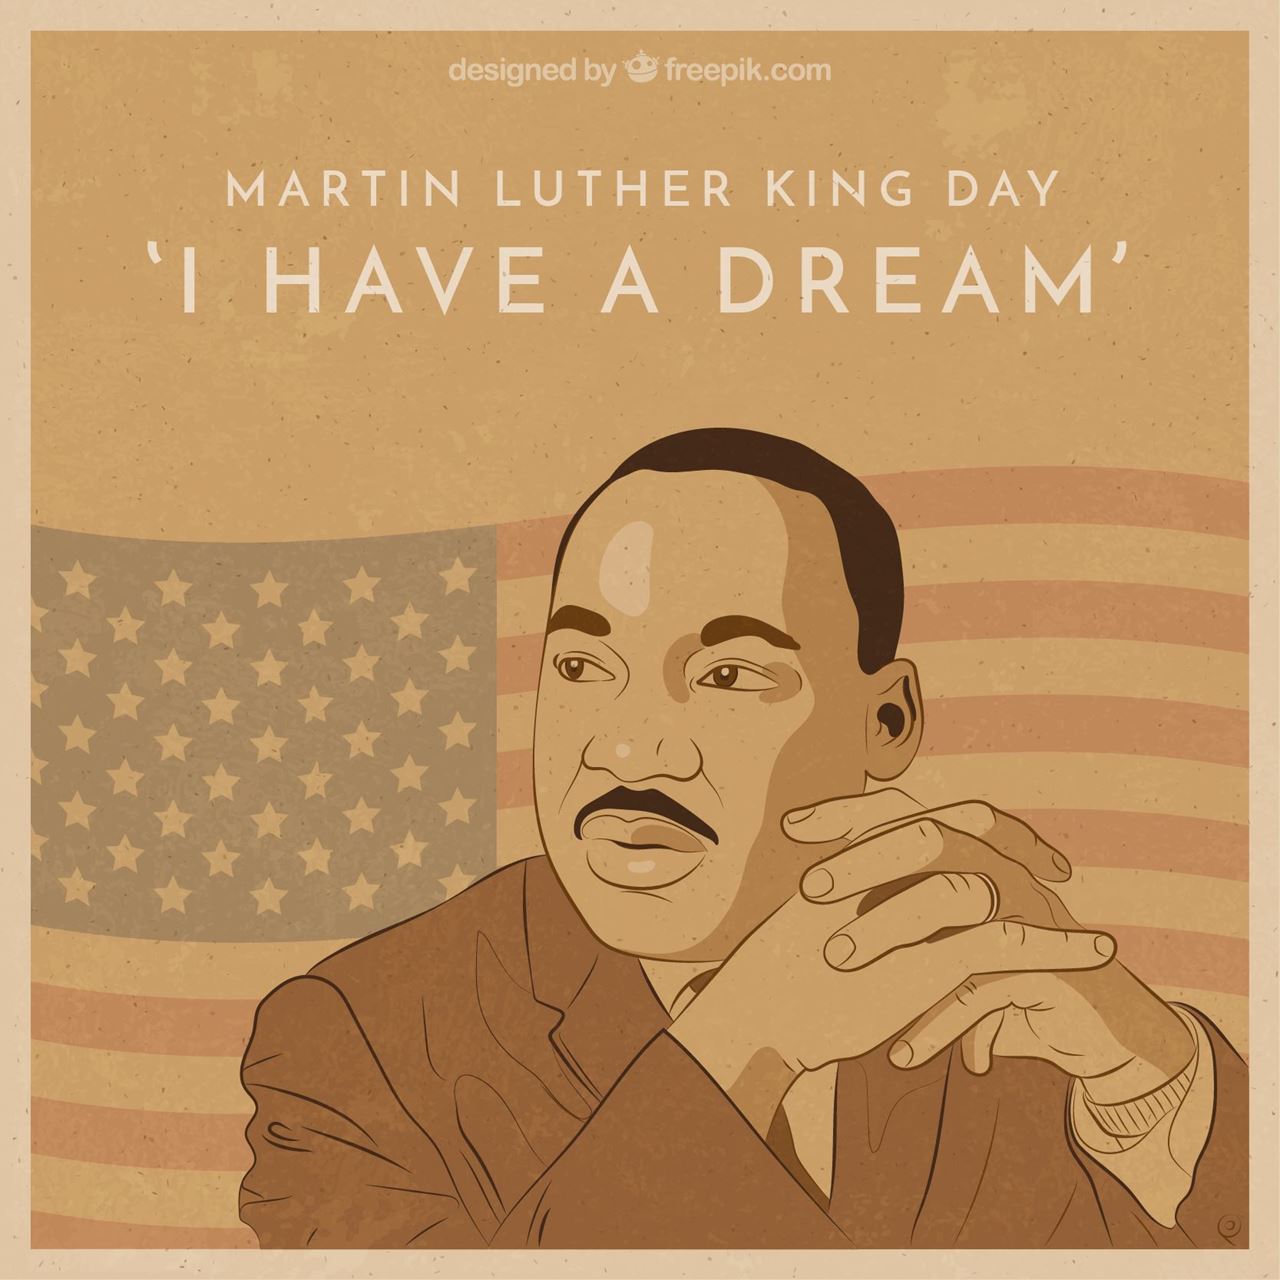 Brief Biography of Martin Luther King Jr.